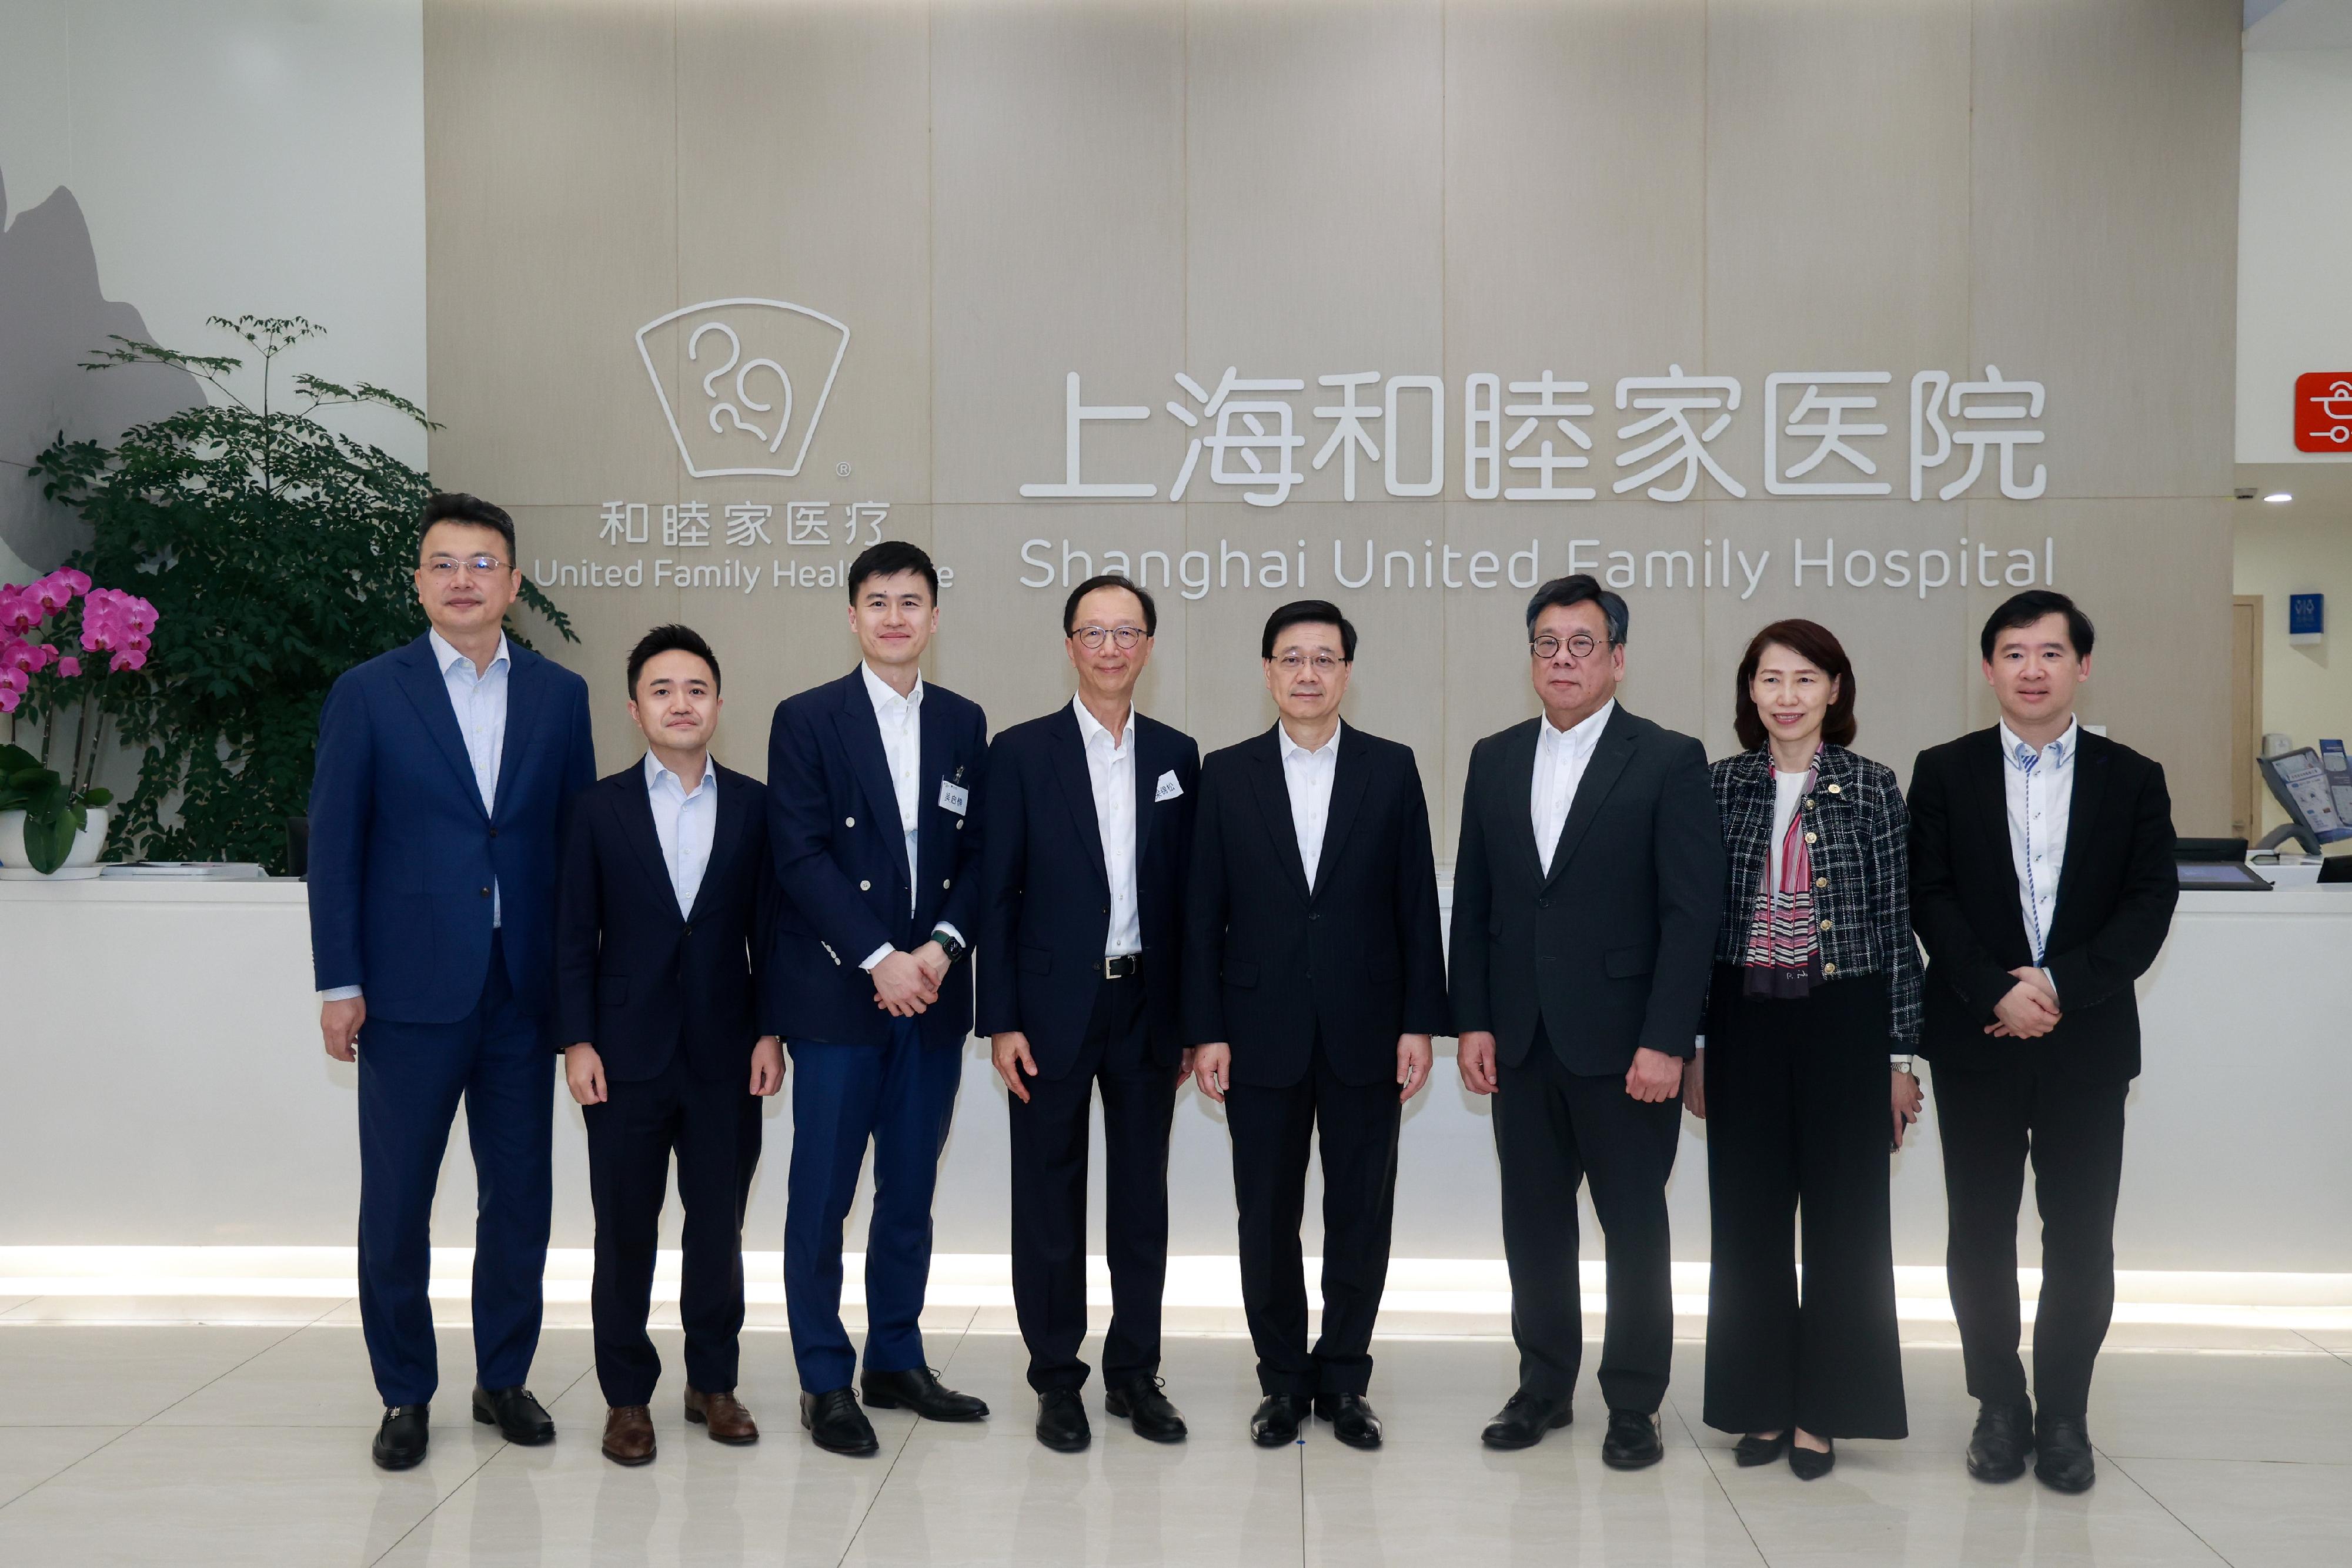 The Chief Executive, Mr John Lee, visited the Shanghai United Family Hospital (ChangNing) today (November 4). Photo shows (from fourth right) Mr Lee; the Secretary for Commerce and Economic Development, Mr Algernon Yau; the Director of the Chief Executive's Office, Ms Carol Yip; and the Under Secretary for Constitutional and Mainland Affairs, Mr Clement Woo, with the hospital representatives.